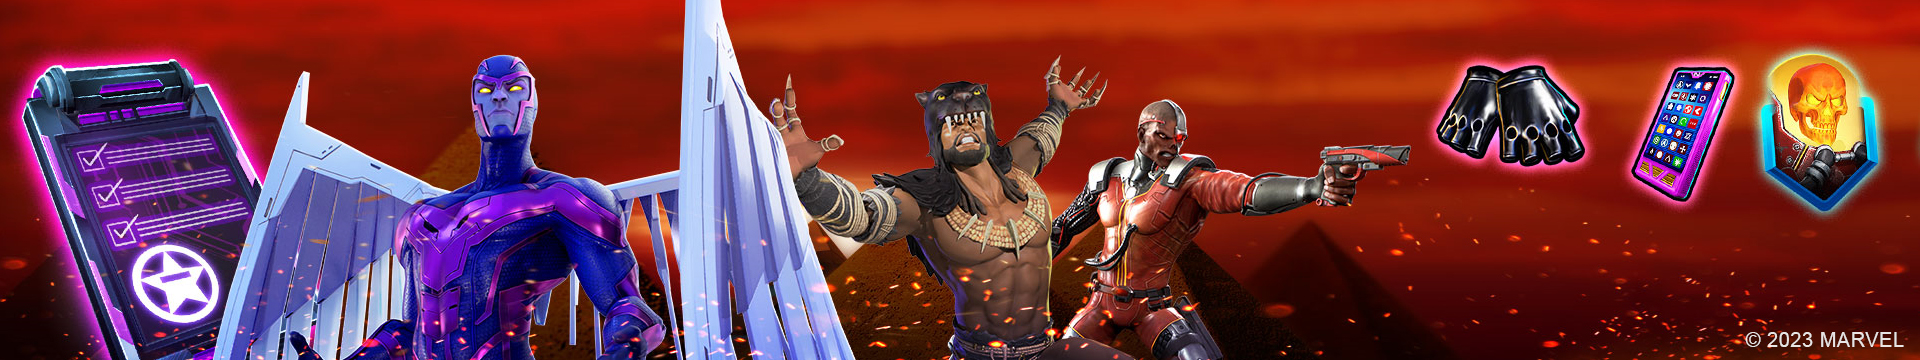 MARVEL Strike Force on X: Scream clears buffs from enemies, applies Bleed  and Slow, and Heals her Symbiote allies when characters are defeated.  Scream has joined the MARVEL Strike Force!  /